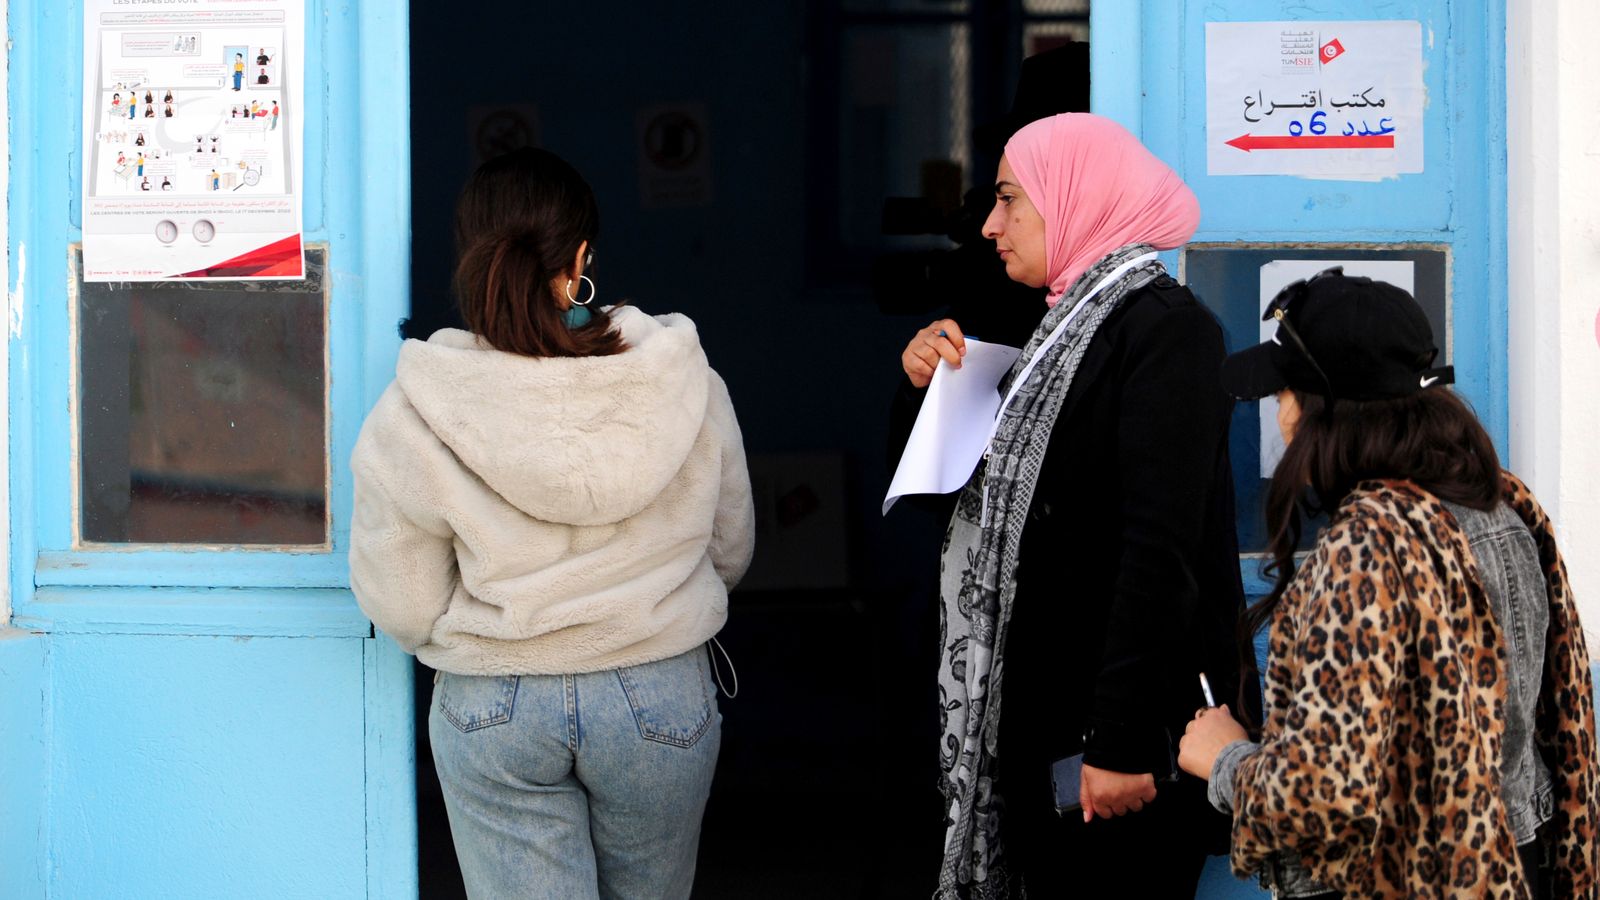 Less than 9% of voters turn out for Tunisia election